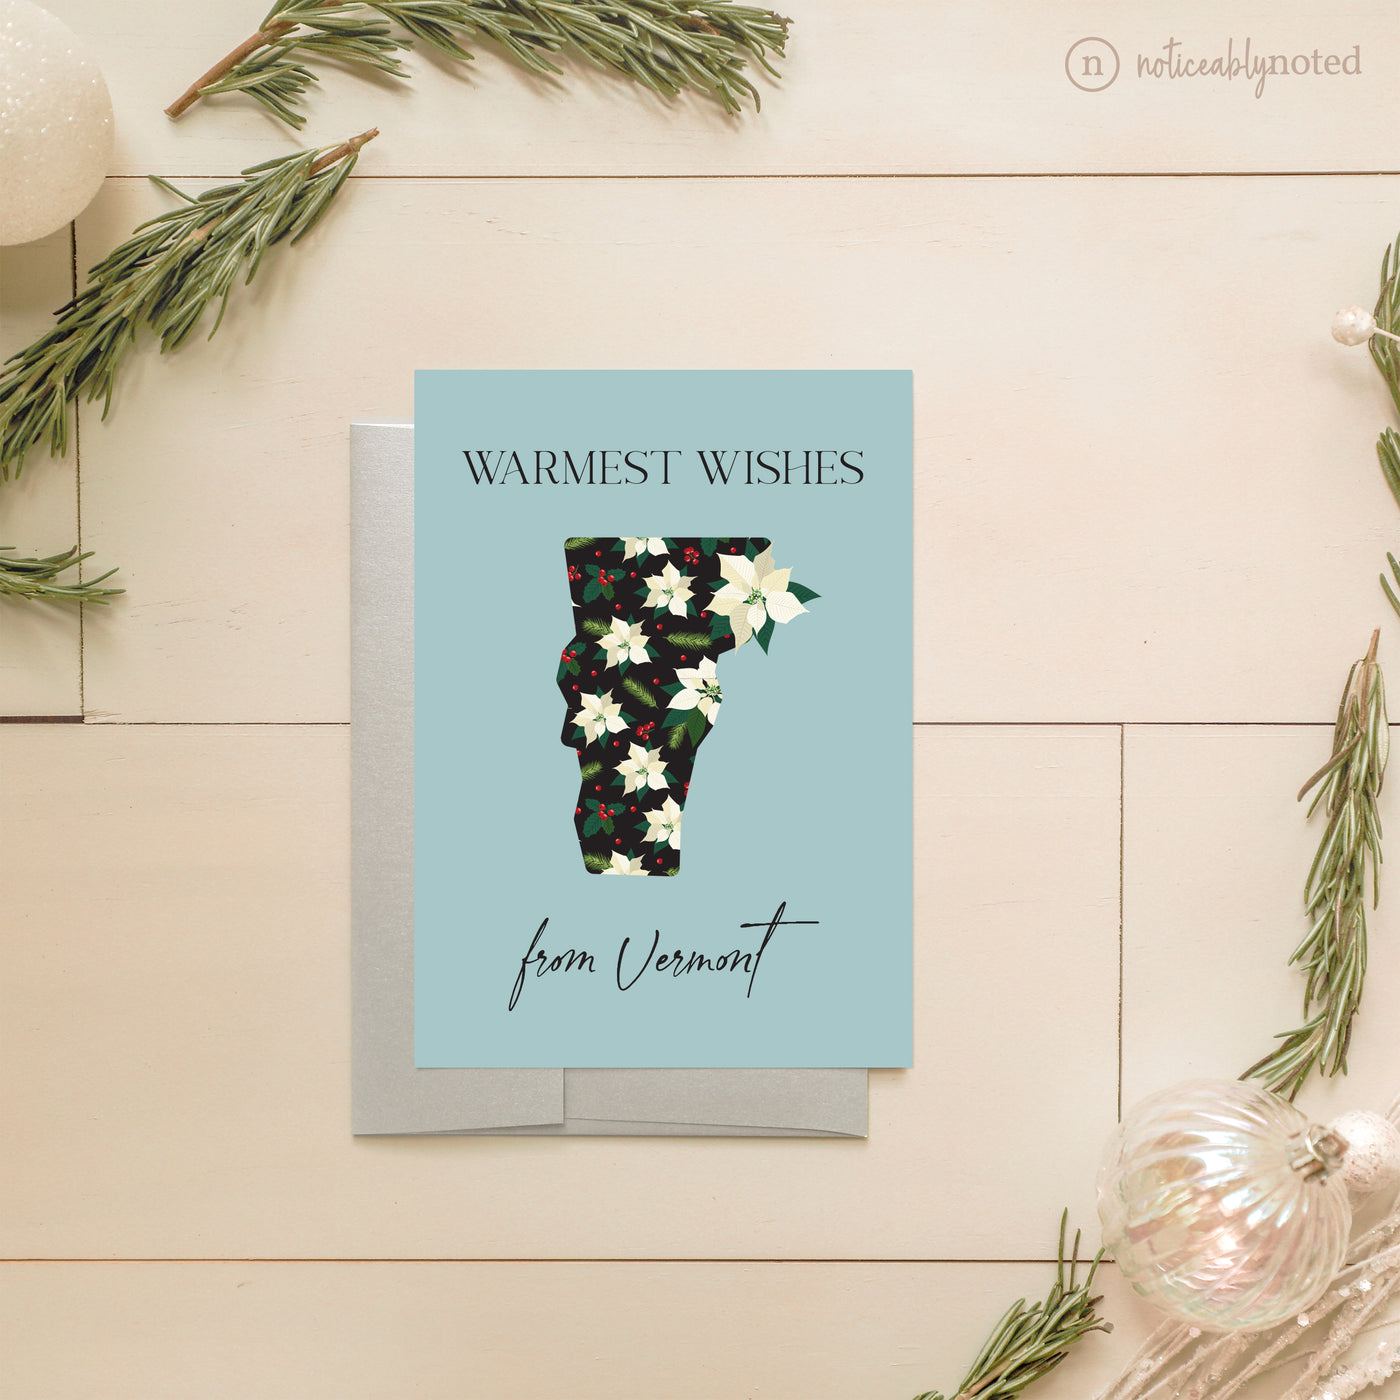 Vermont Holiday Greeting Card | Noticeably Noted